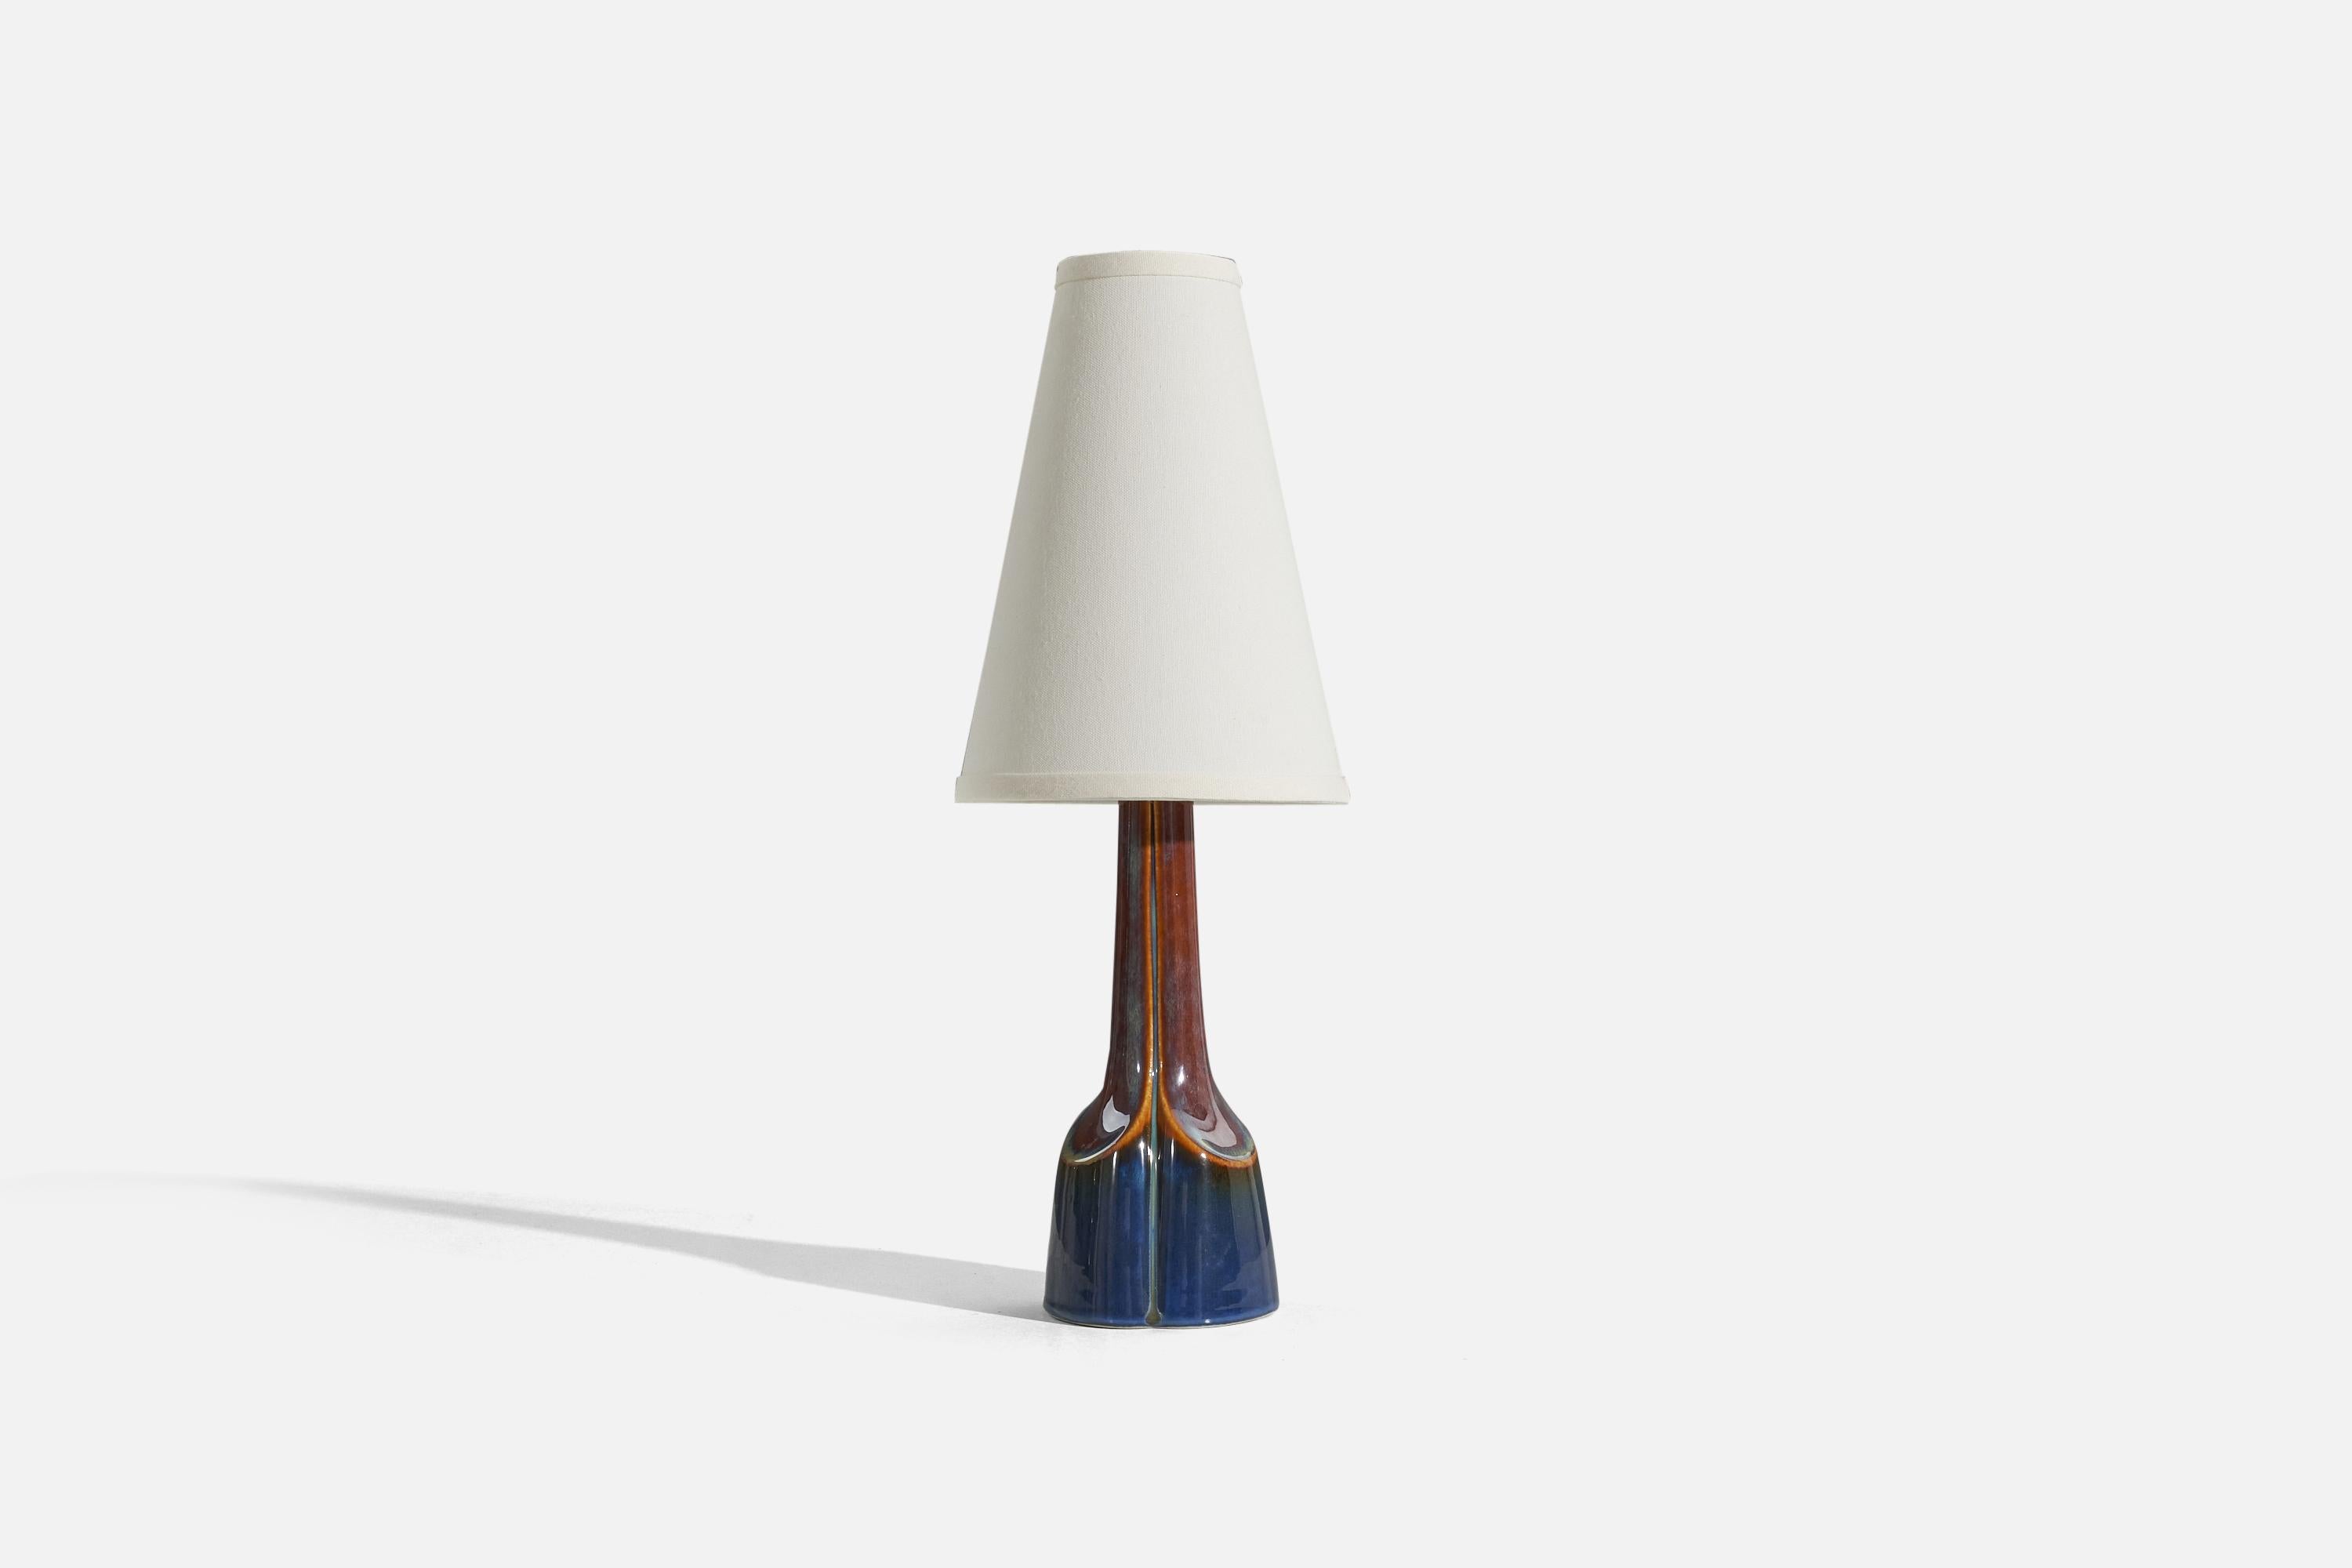 A blue and brown, glazed stoneware table lamp designed and produced by Søholm Stentøj, Denmark, c. 1960s.

Sold without lampshade. 
Dimensions of Lamp (inches) : 13.1875 x 4.25 x 4.25 (H x W x D)
Dimensions of Shade (inches) : 3.25 x 7.25 x 10